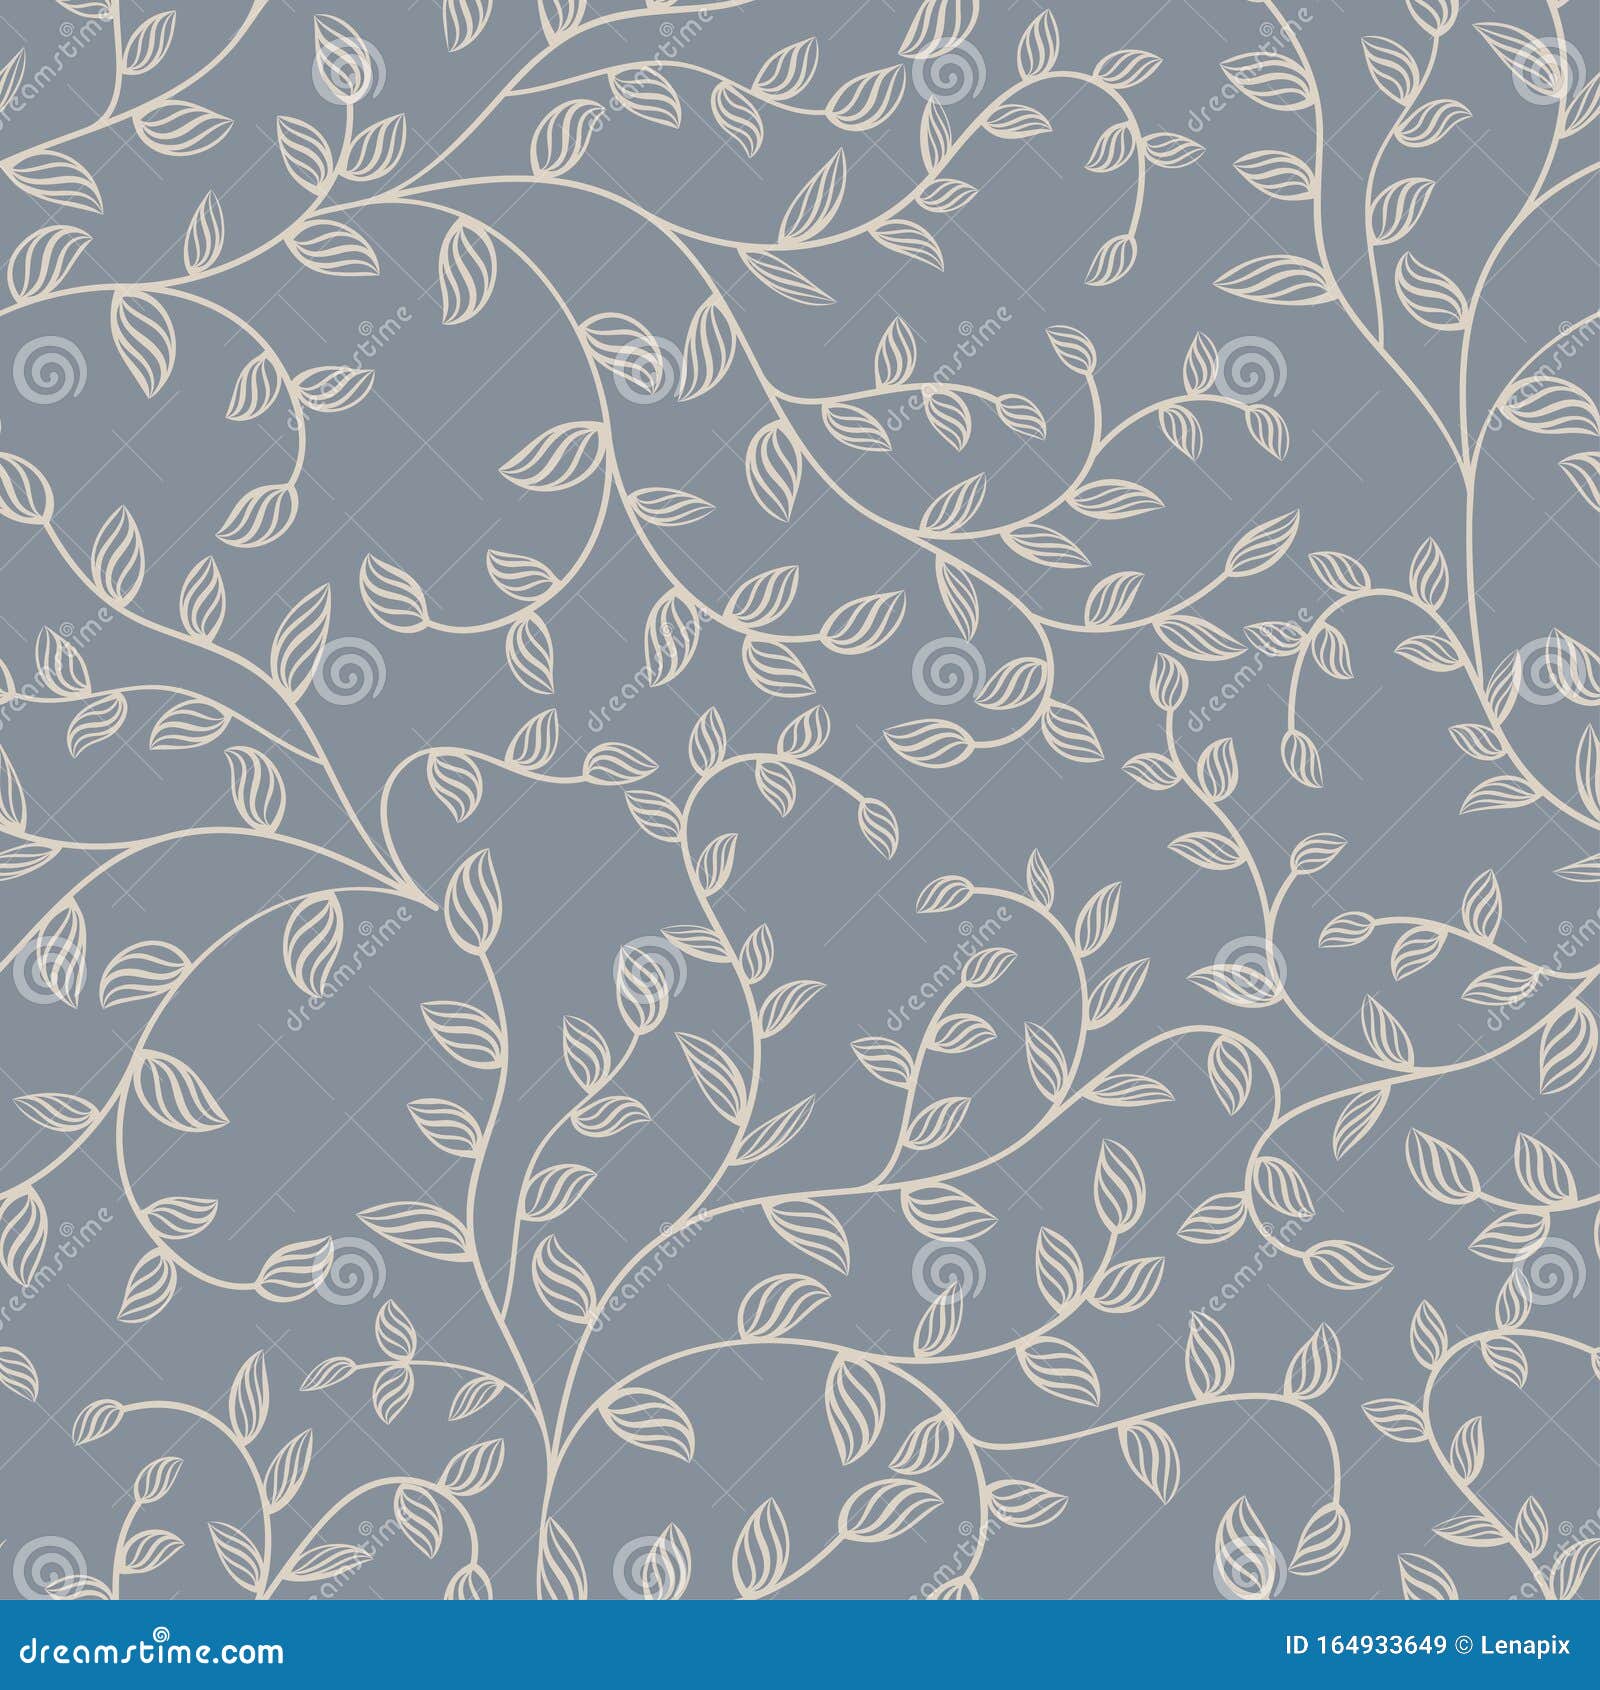 White and Gray Seamless Leaves Wallpaper Stock Vector - Illustration of